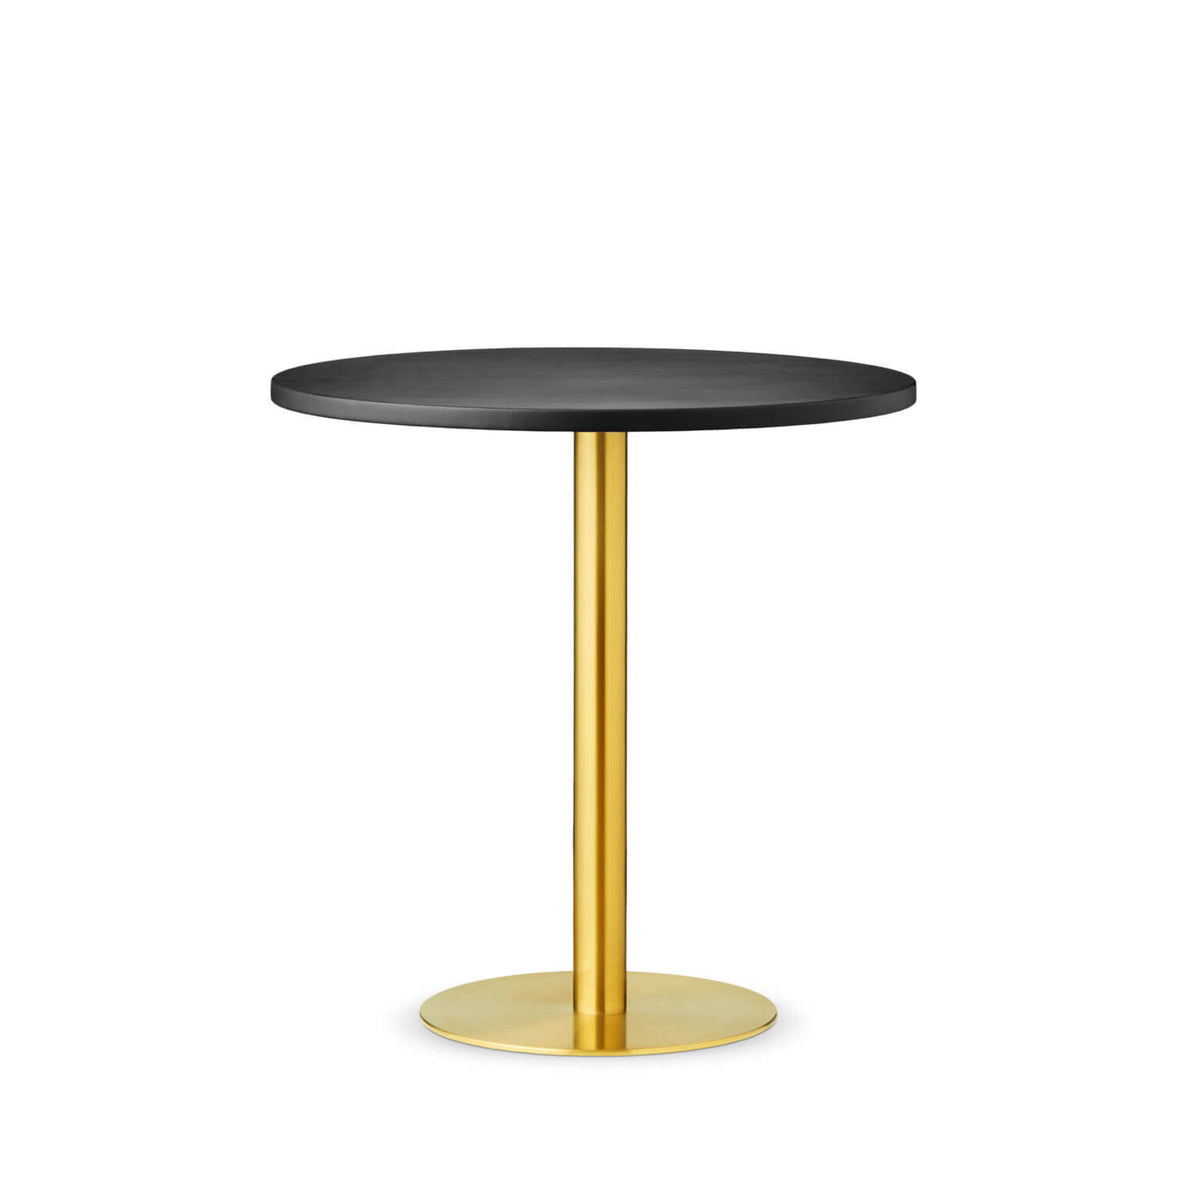 Design By Us Skins round table - Black/Brass